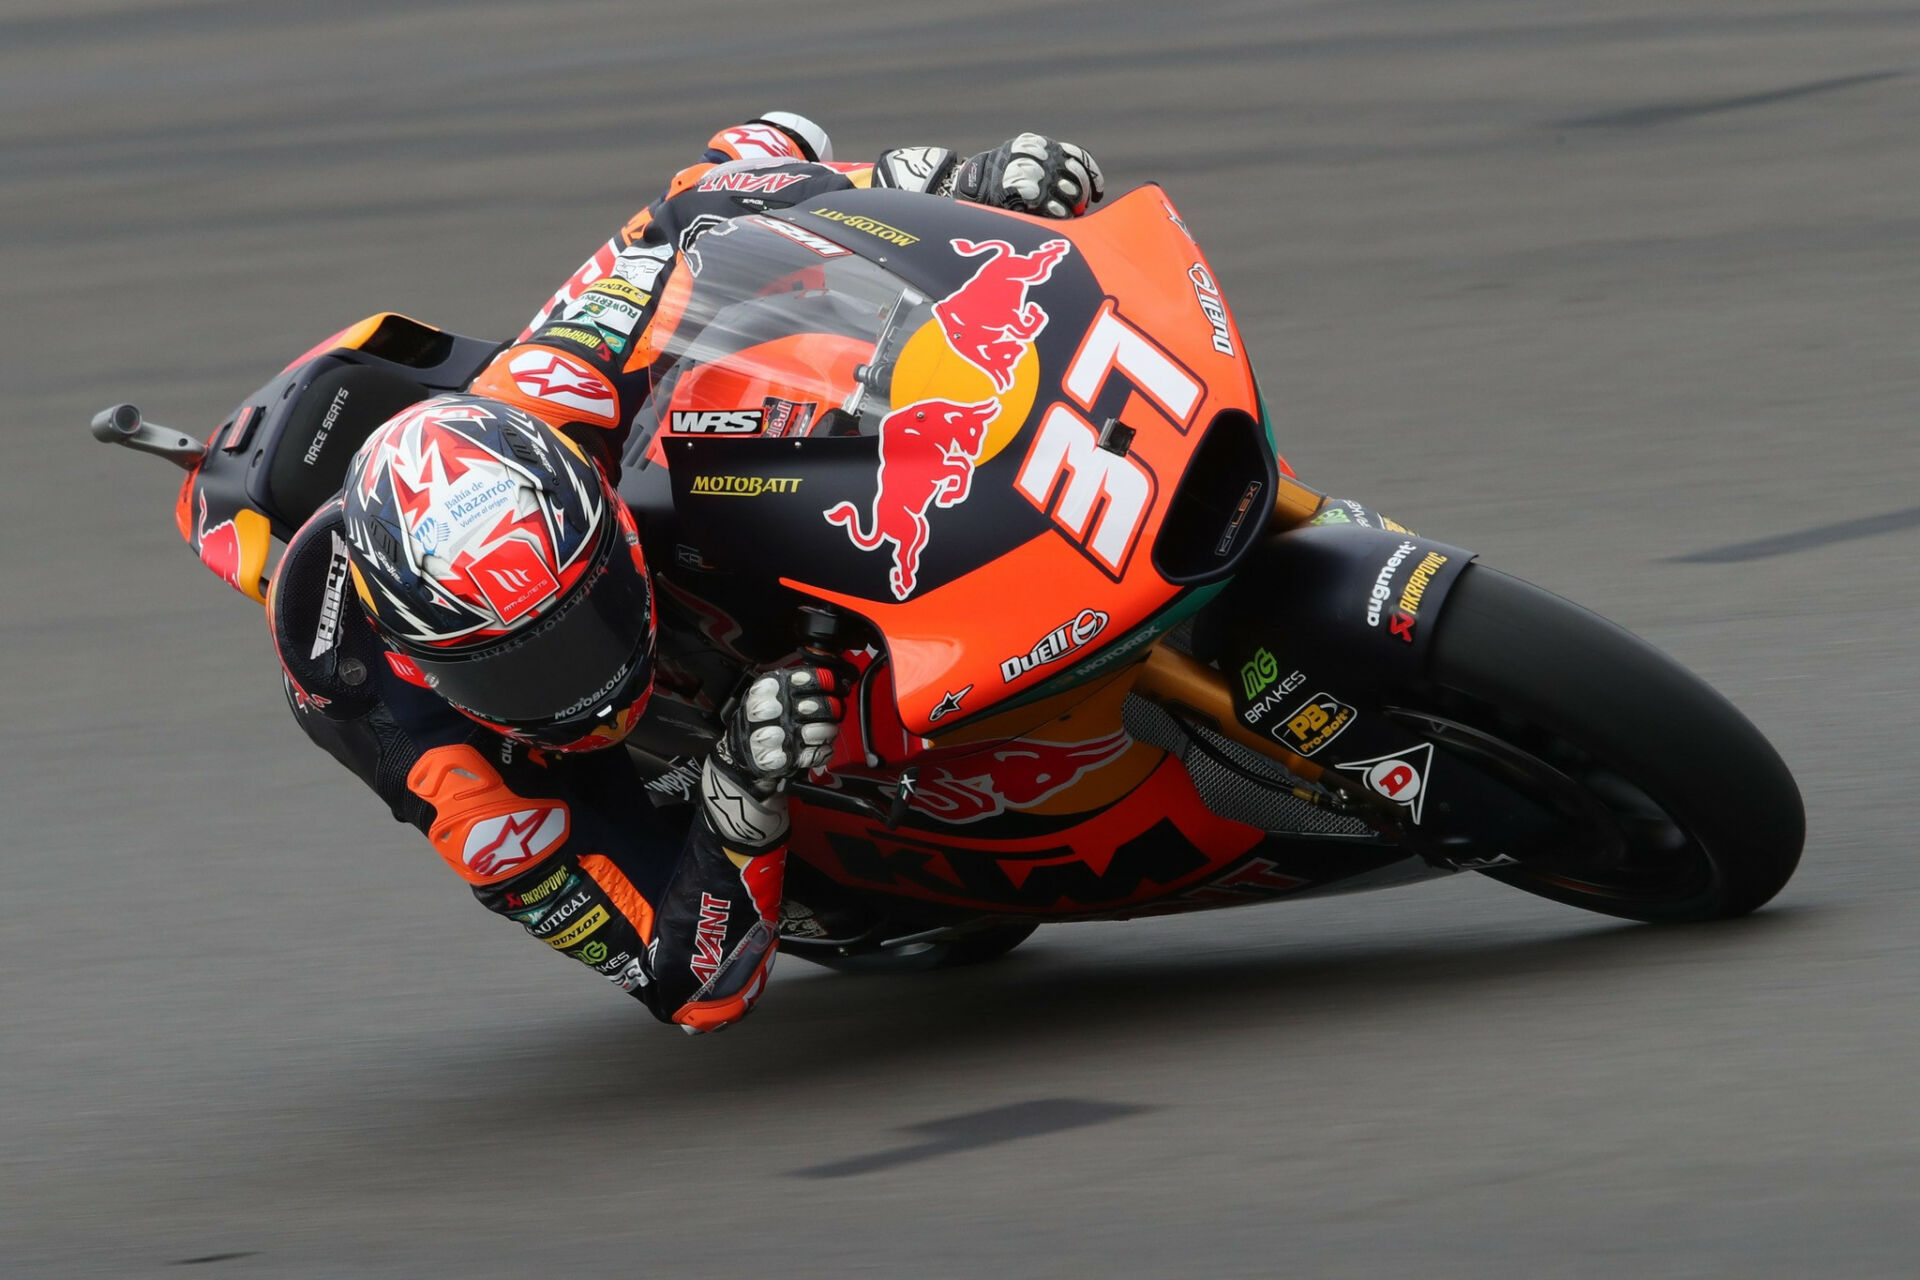 Pedro Acosta (37), as seen during practice on Friday. Photo courtesy Red Bull KTM Ajo.